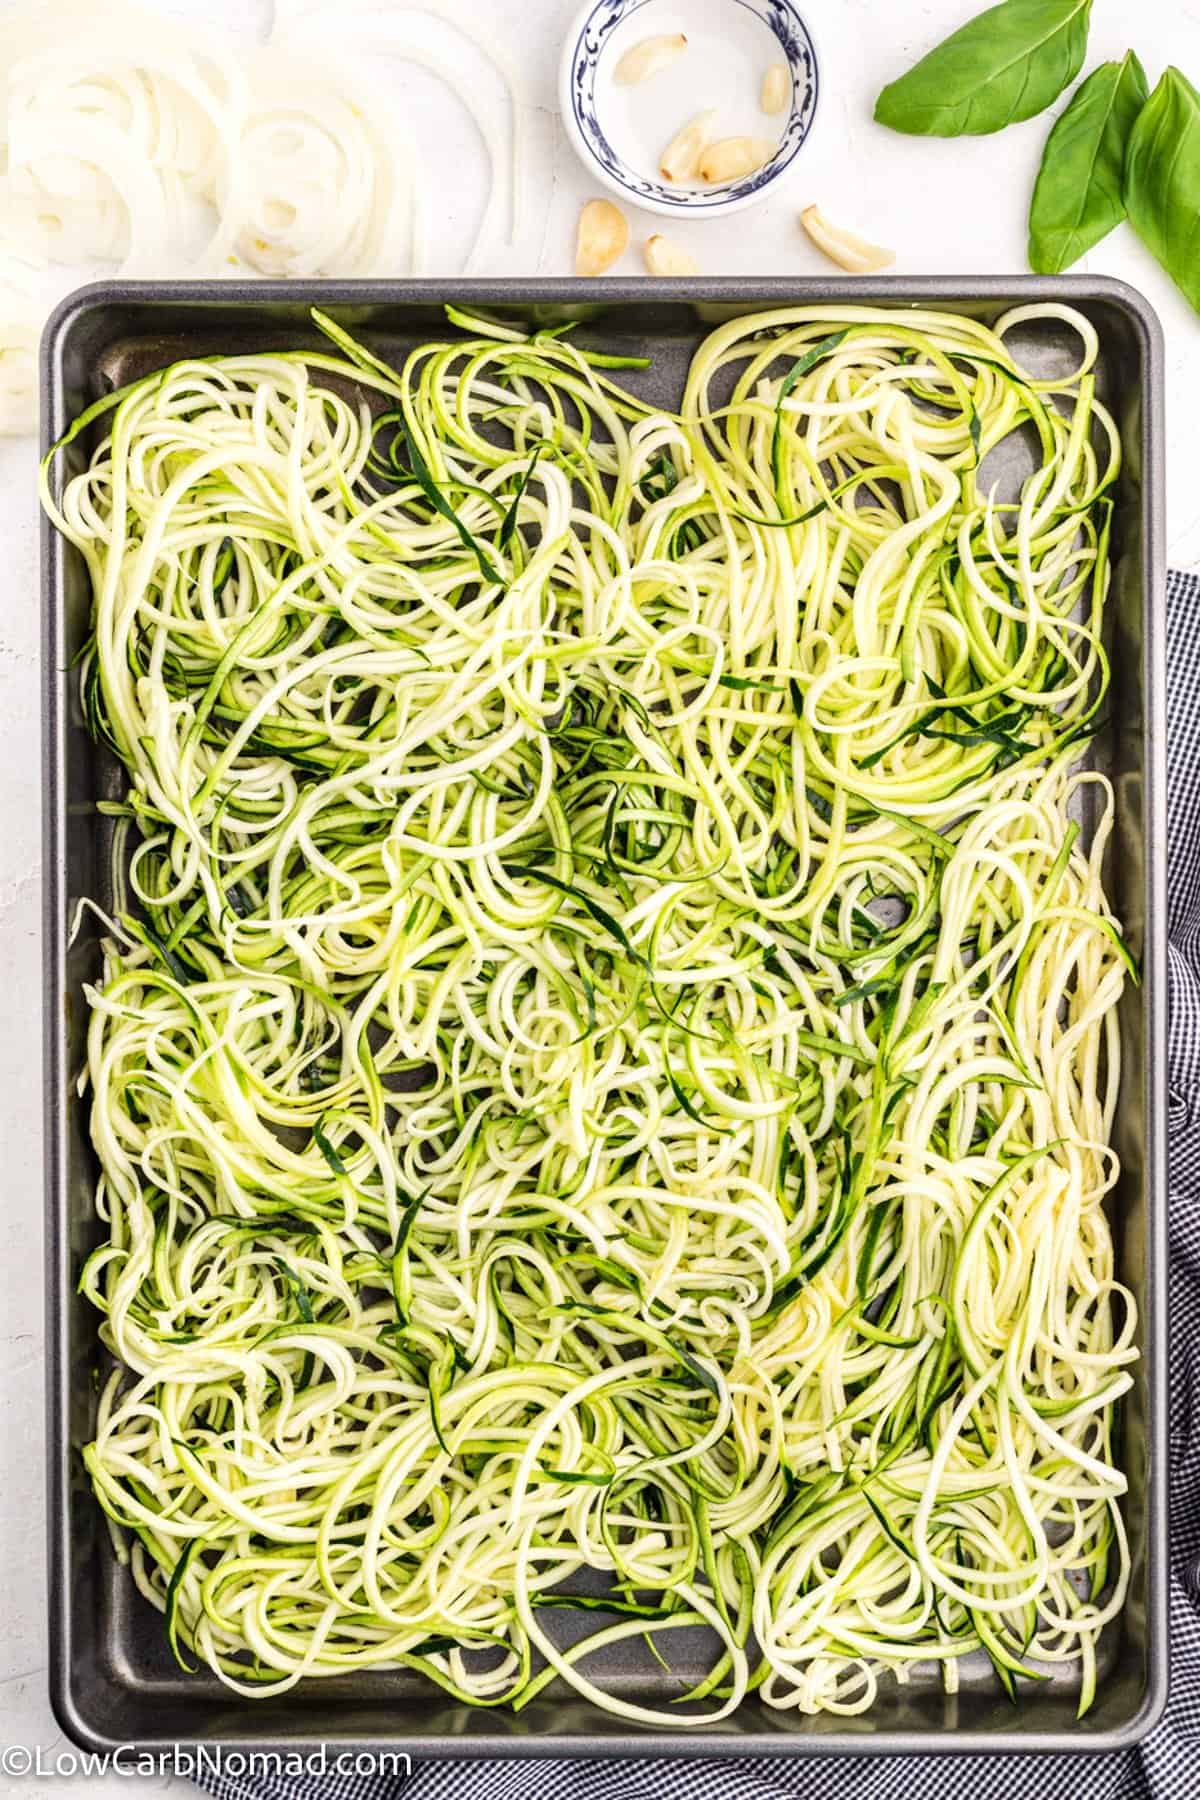 https://www.lowcarbnomad.com/wp-content/uploads/2022/06/Low-Carb-Keto-Homemade-Zucchini-Noodles-Recipe-3.jpg